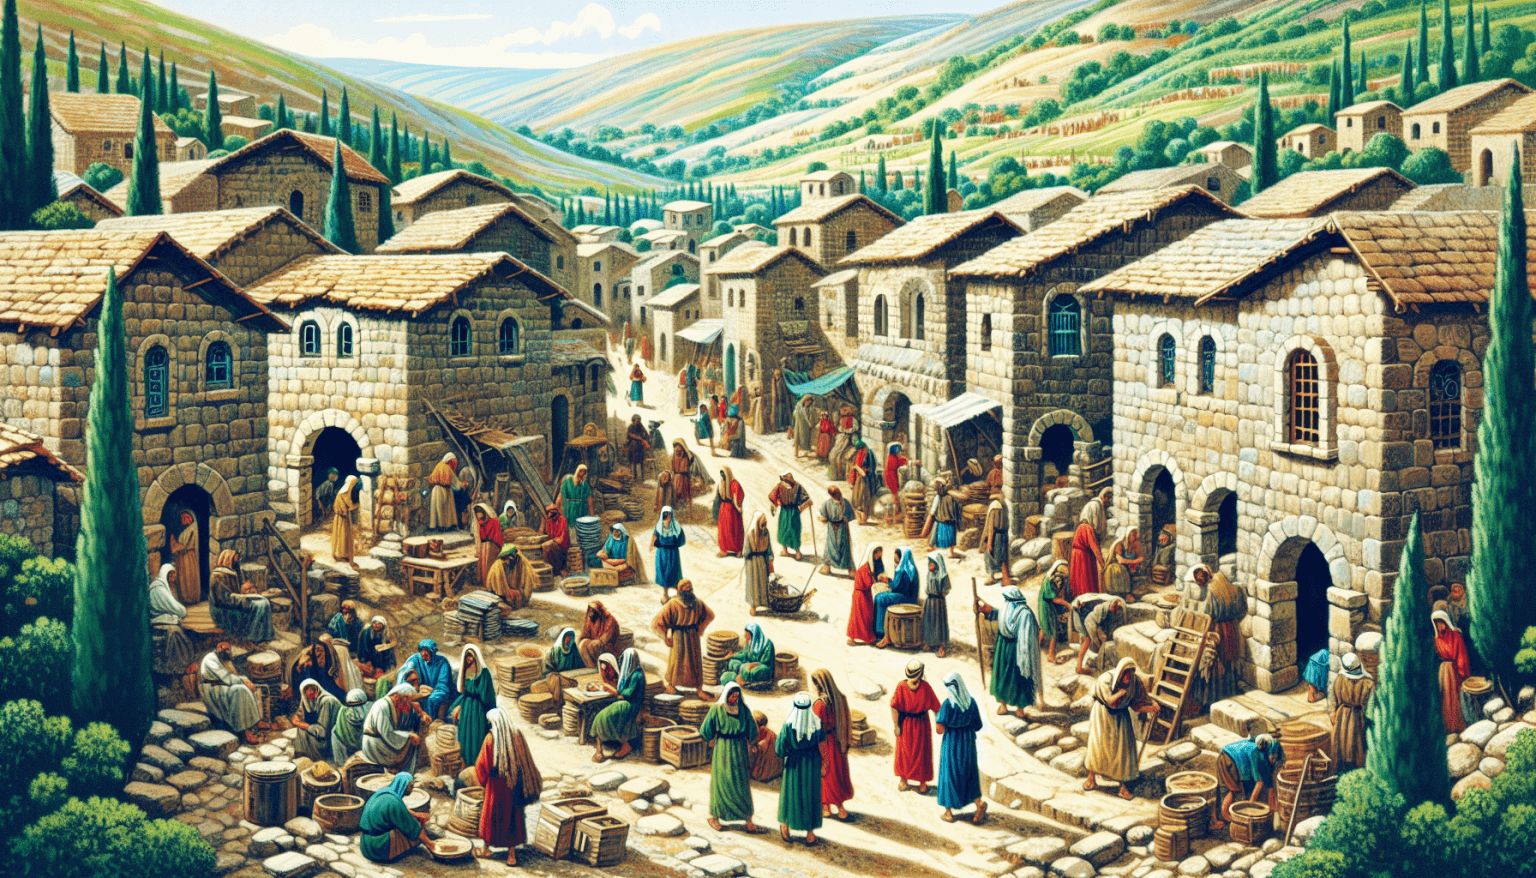 Artistic depiction of the ancient village of Nazareth during the time of Jesus, bustling with activity as villagers, including figures resembling Jesus and his disciples, engage in daily tasks amidst